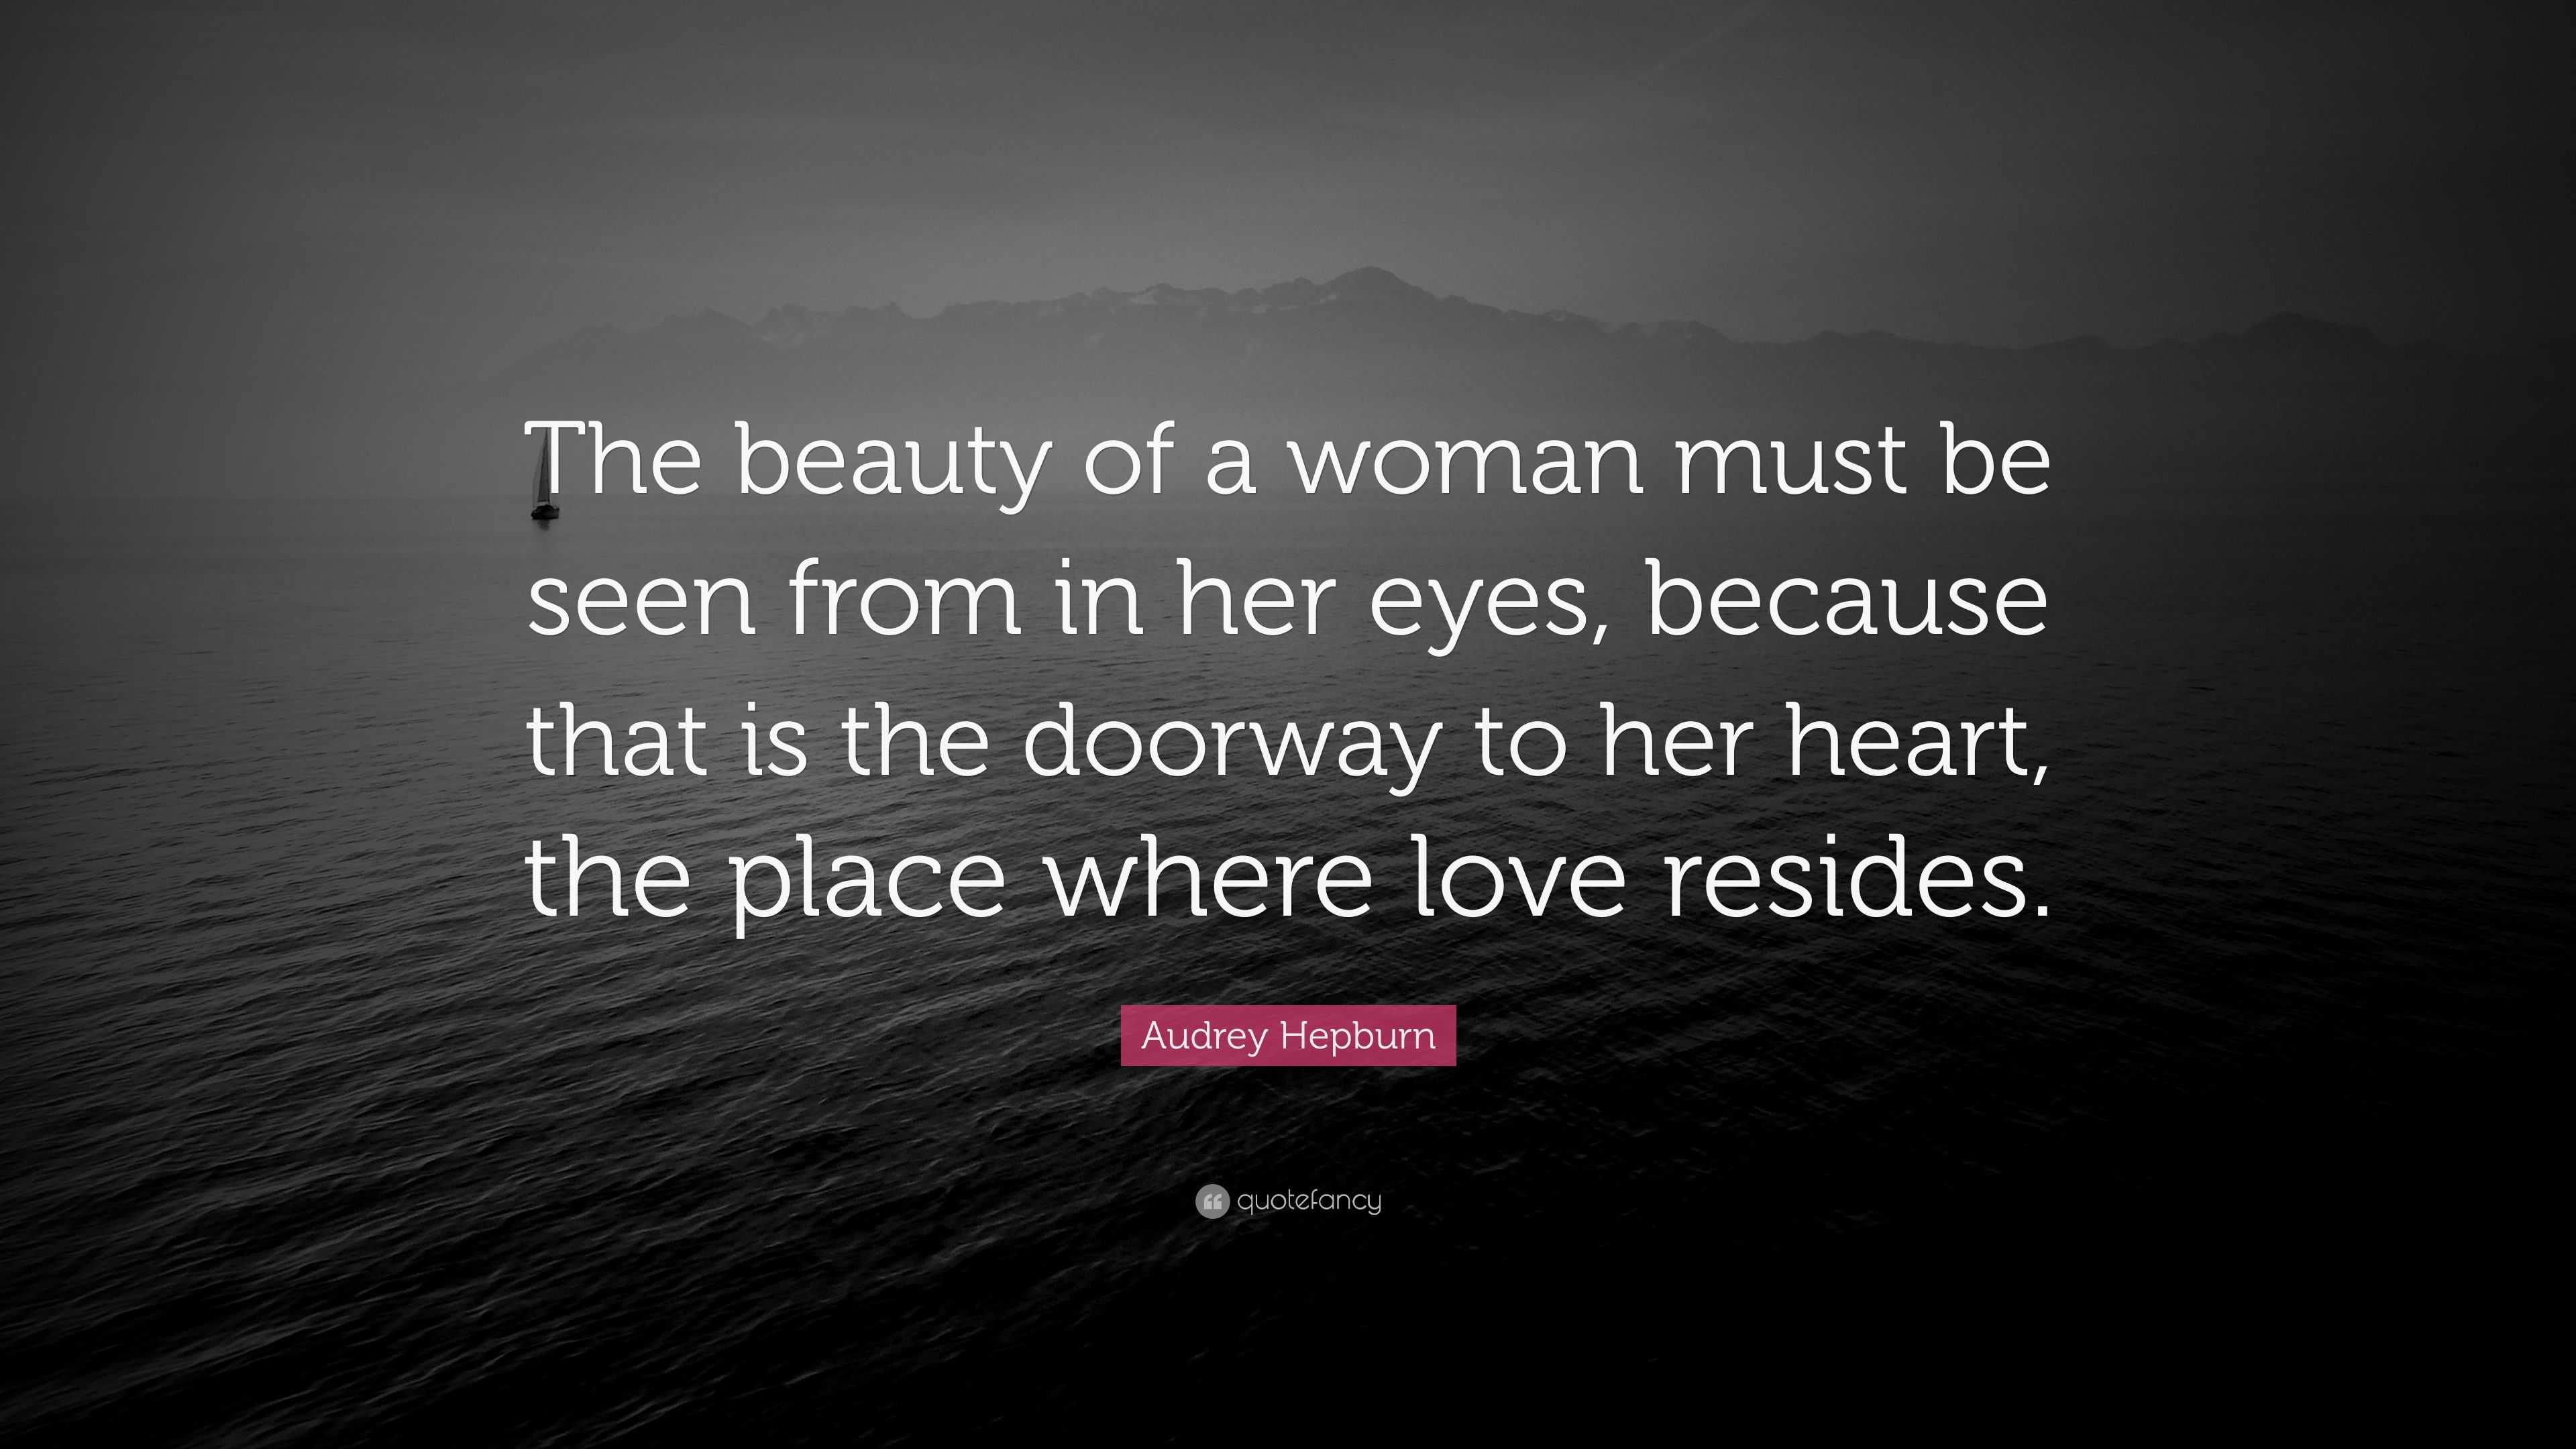 Audrey Hepburn Quote: “The beauty of a woman must be seen from in her ...